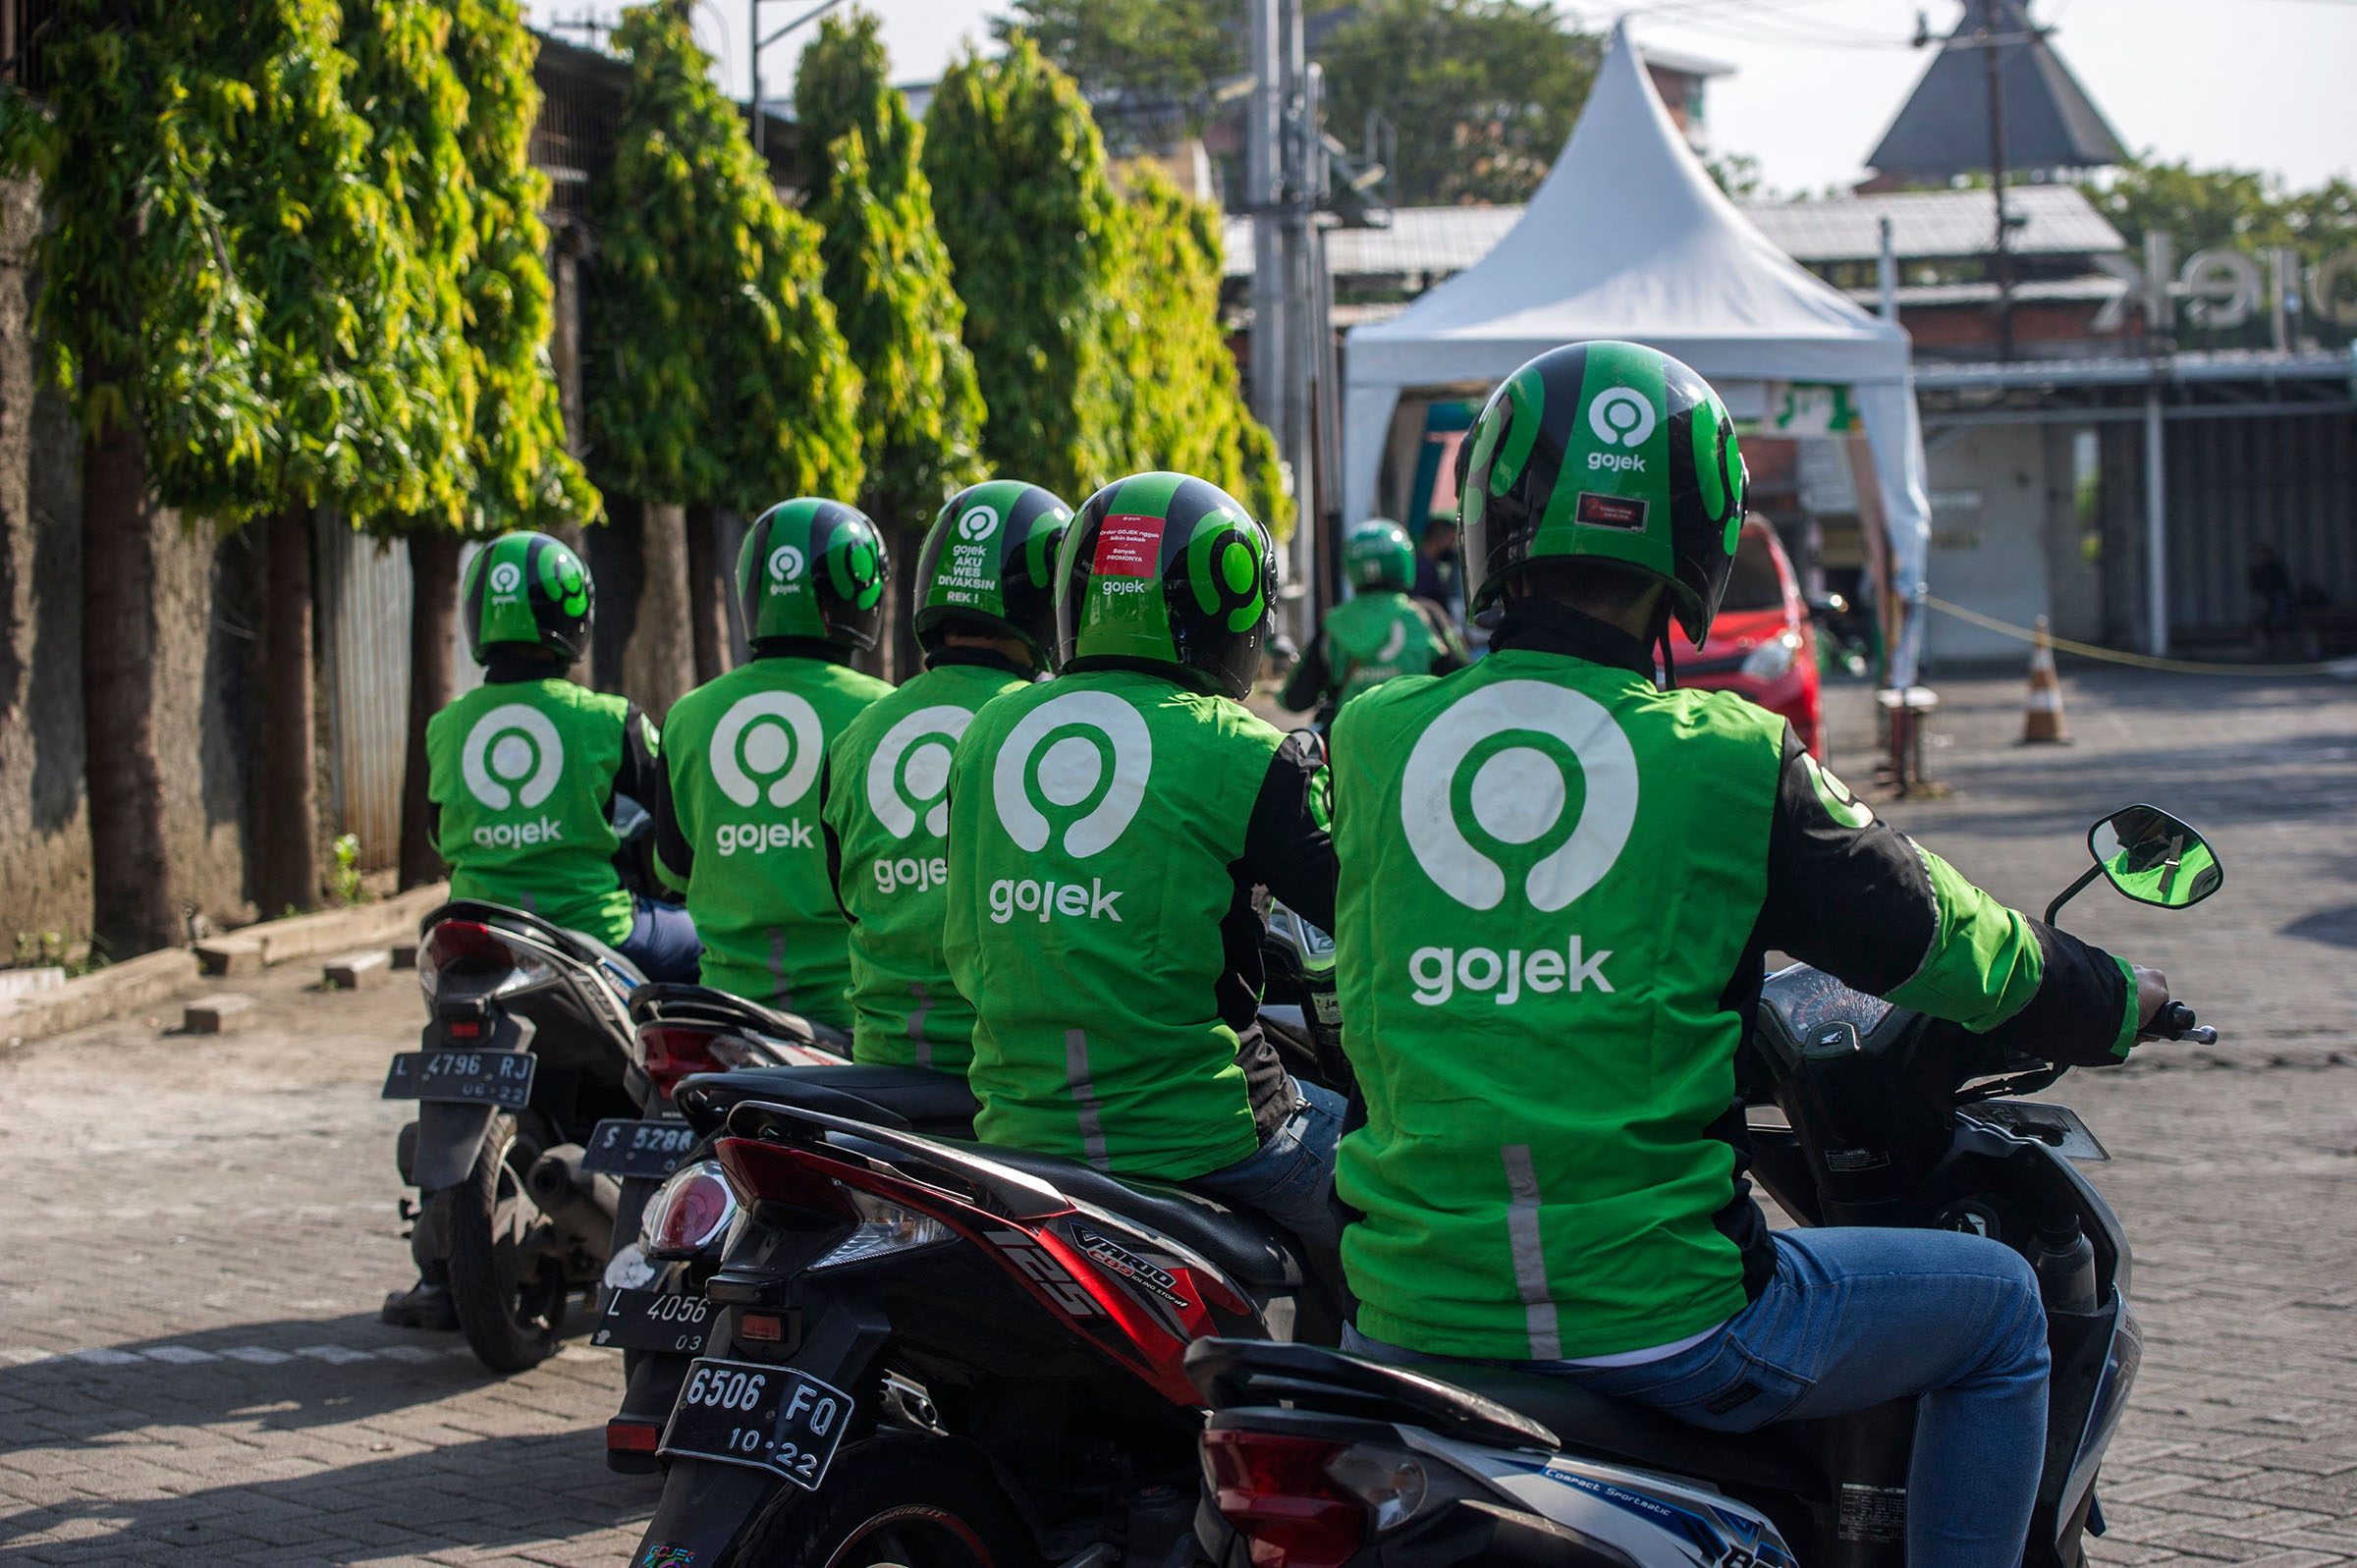 Gojek riders wait for their delivery orders at a distribution centre in Surabaya on May 17, 2021, as Gojek and Tokopedia unveiled a merger to form GoTo Group, creating the largest tech firm in the world's fourth most populous country. (Juni Kriswanto—APF/Getty Images)